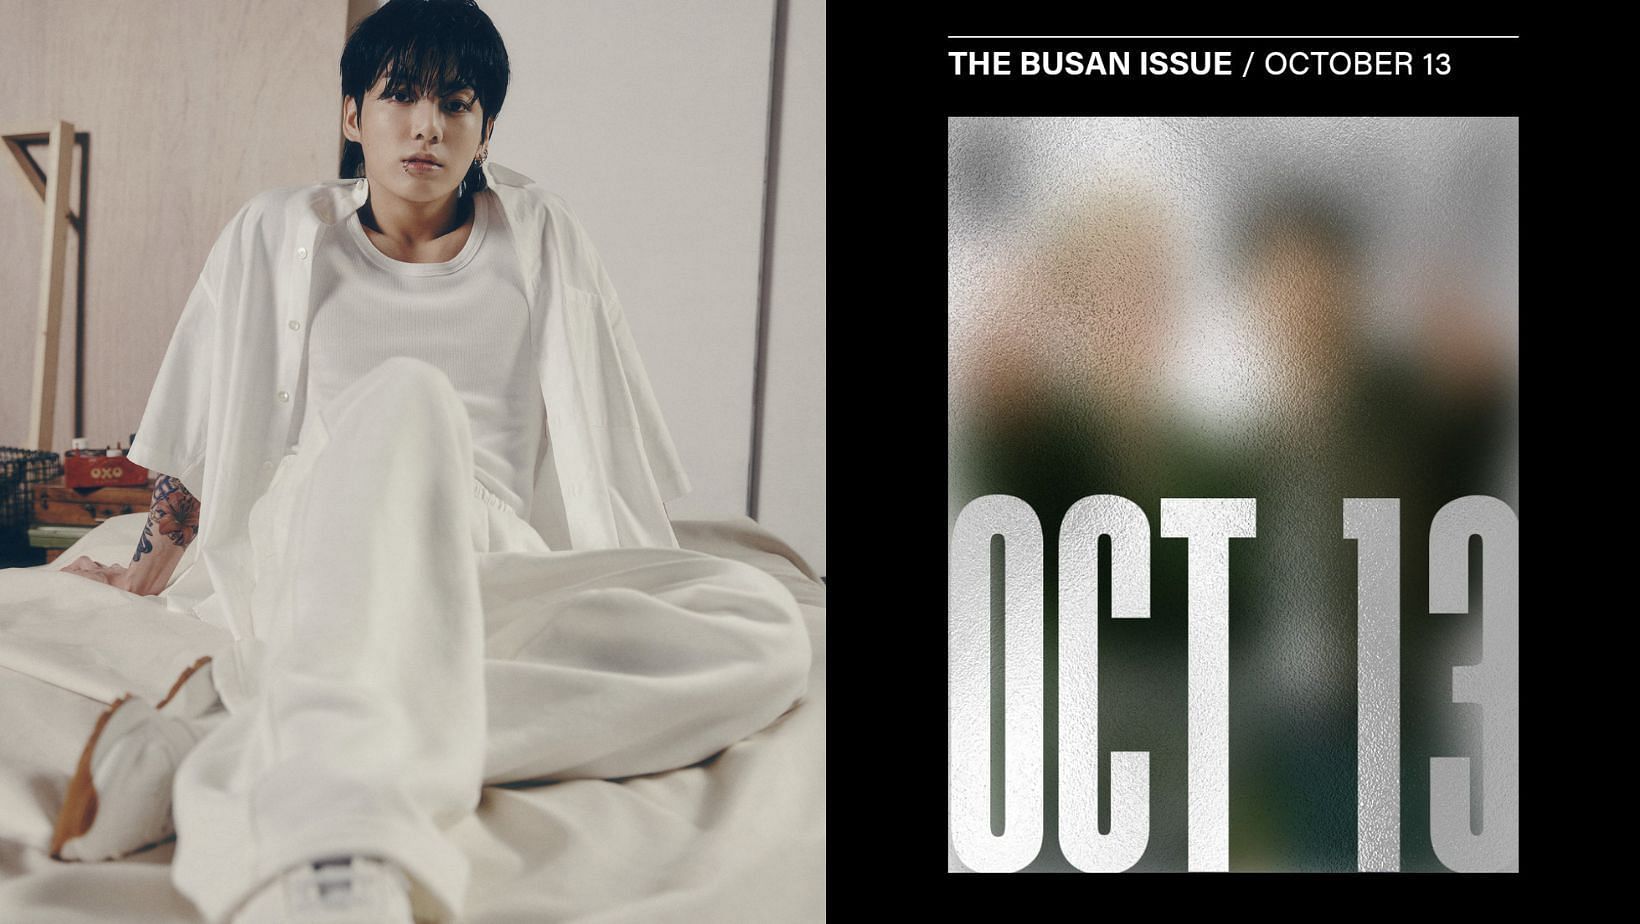 BTS Jungkook, featuring The Busan Issue sends internet into a frenzy. (Images via Twitter/@mhereonlyforbts and @BIGHIT_MUSIC)